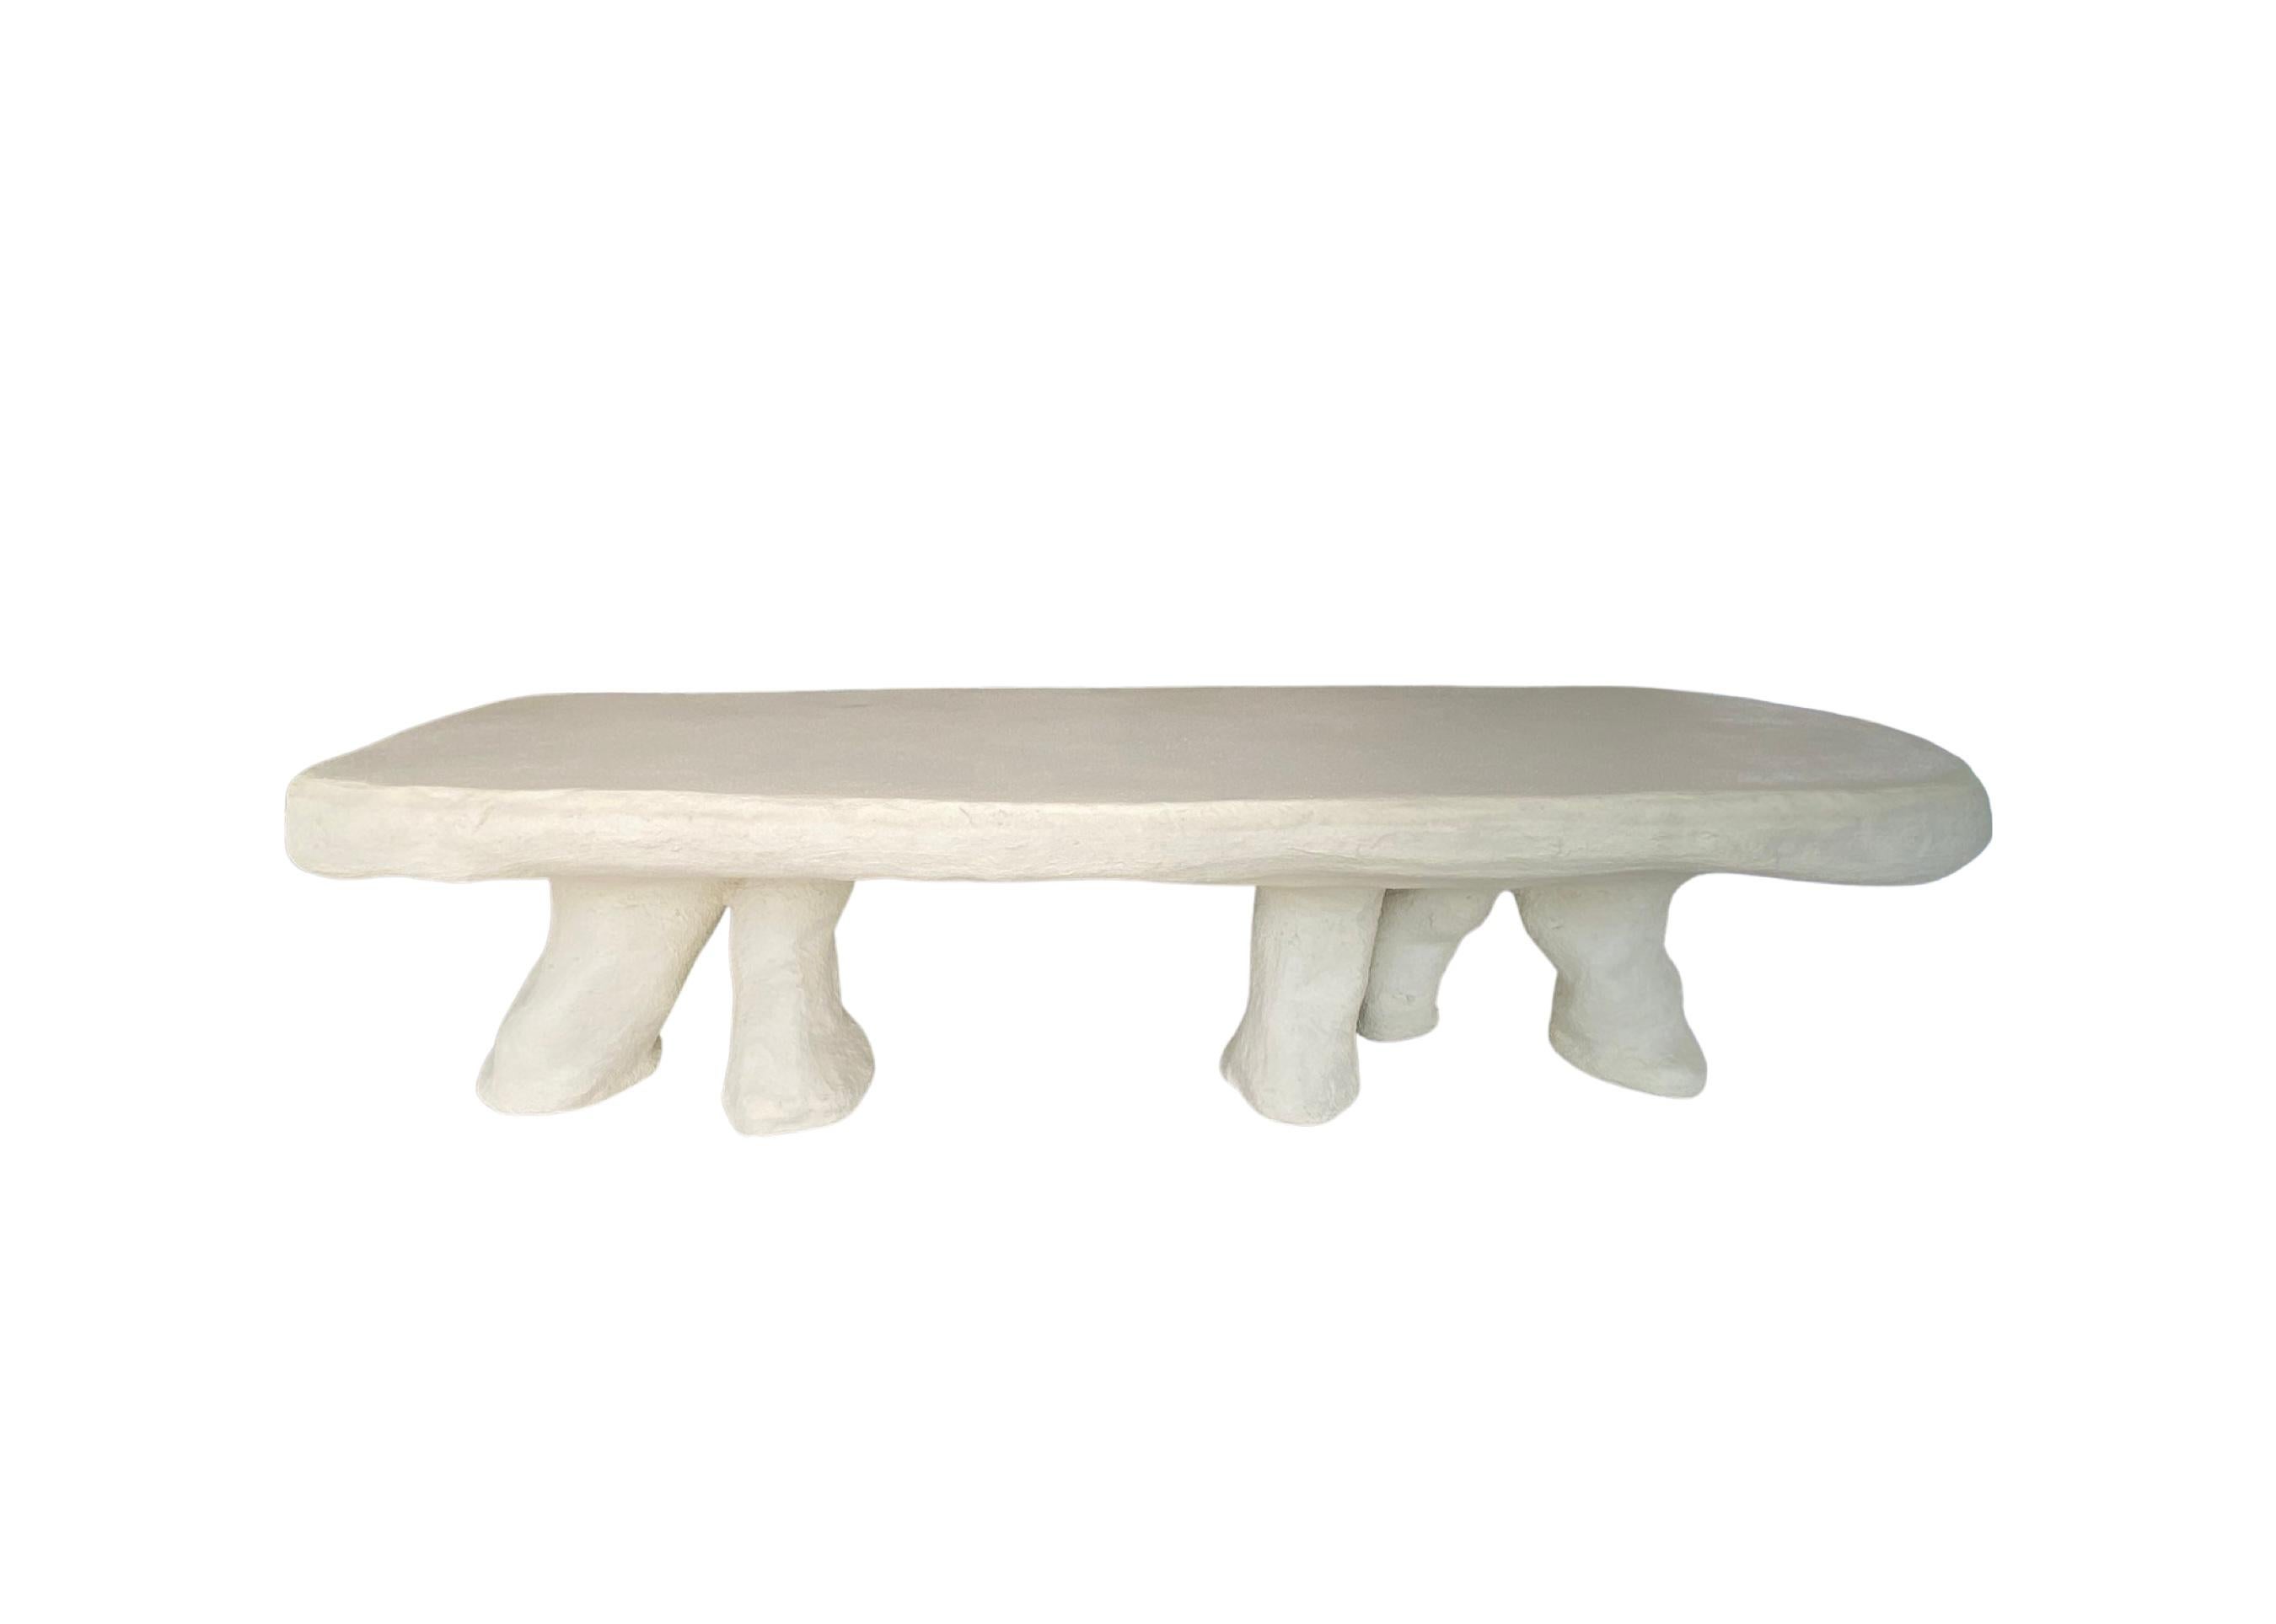 Dumbo Dining Table by Mary-Lynn & Carlo
The Elephant Project
Dimensions: H 76 x W 315 x D 110 cm
Materials: concrete colored, foam polystyrene
Finish: water, stains repellent

MARYLYNN AND CARLO

The Massoud siblings have been experimenting with